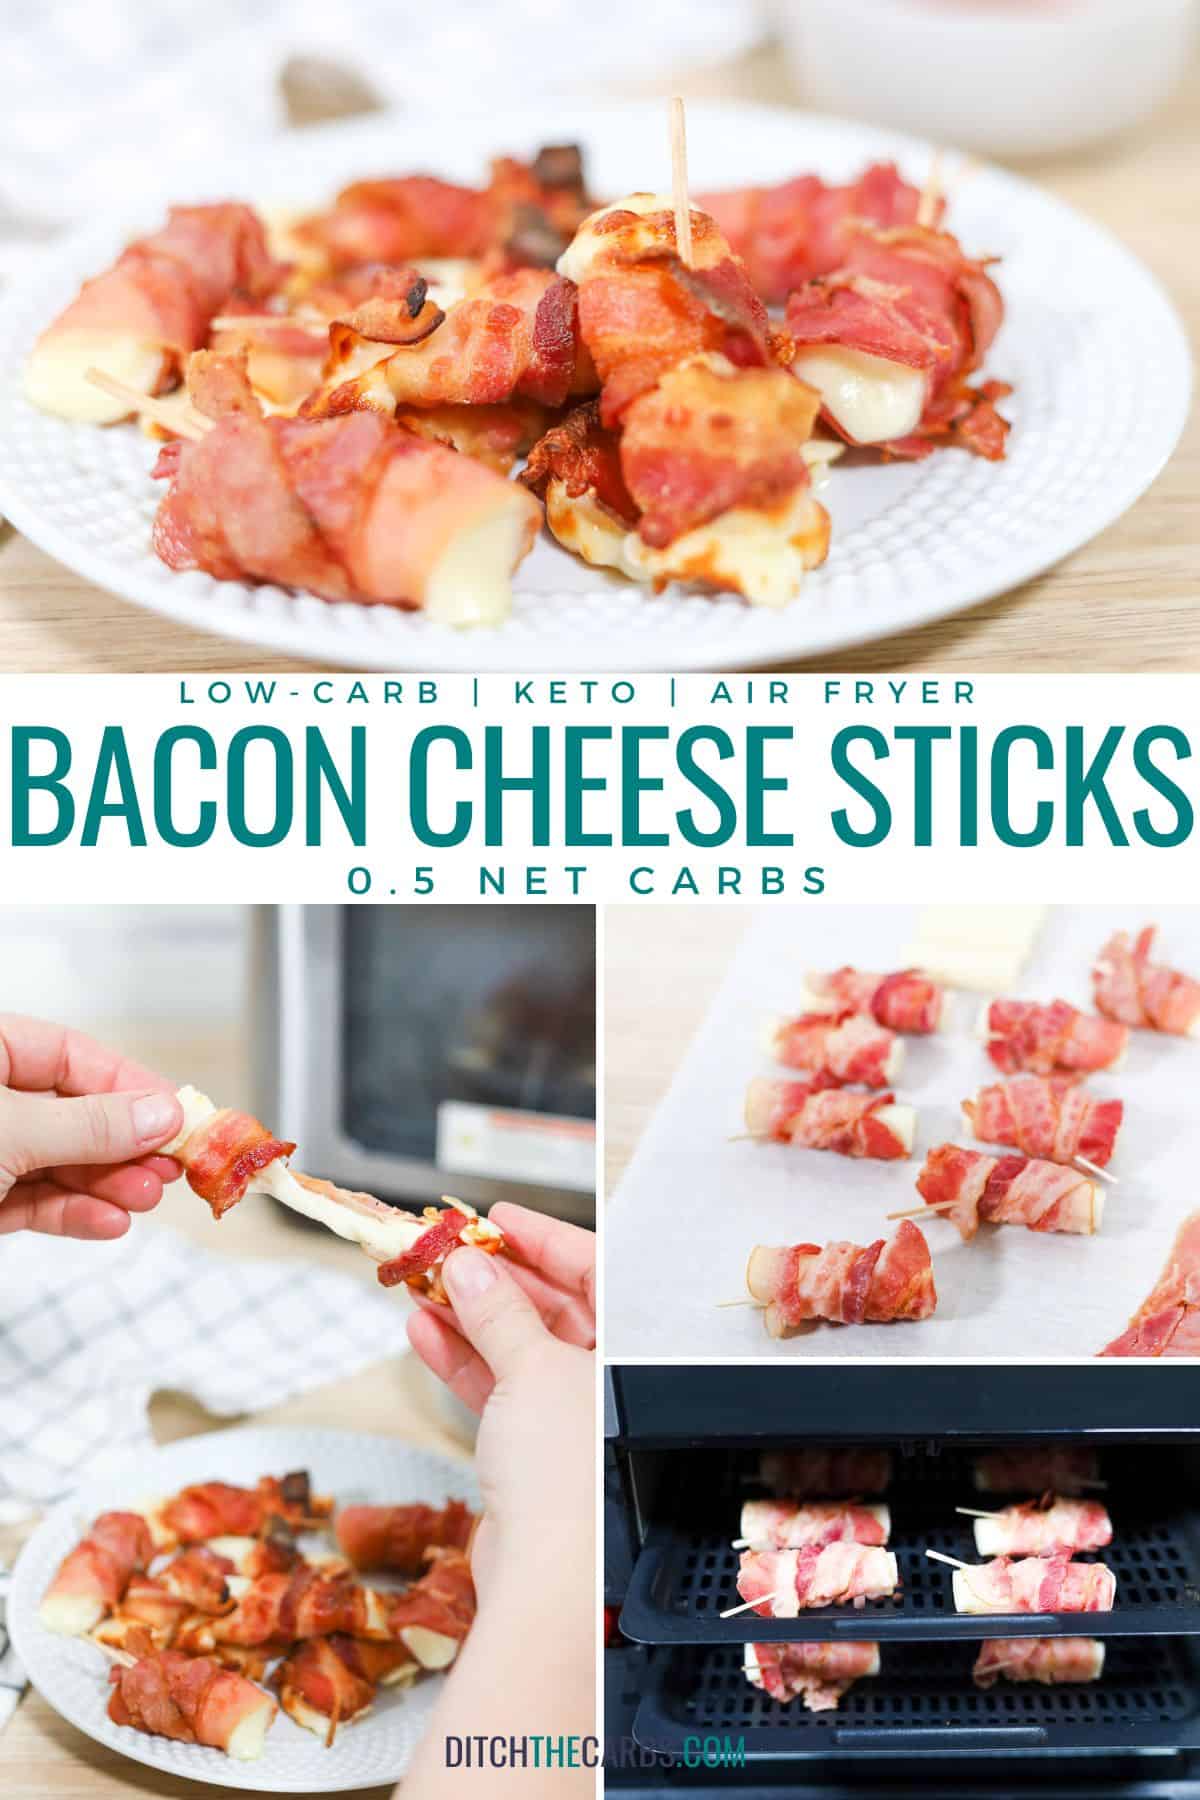 low carb keto air fryer bacon cheese sticks collage for Pinterest